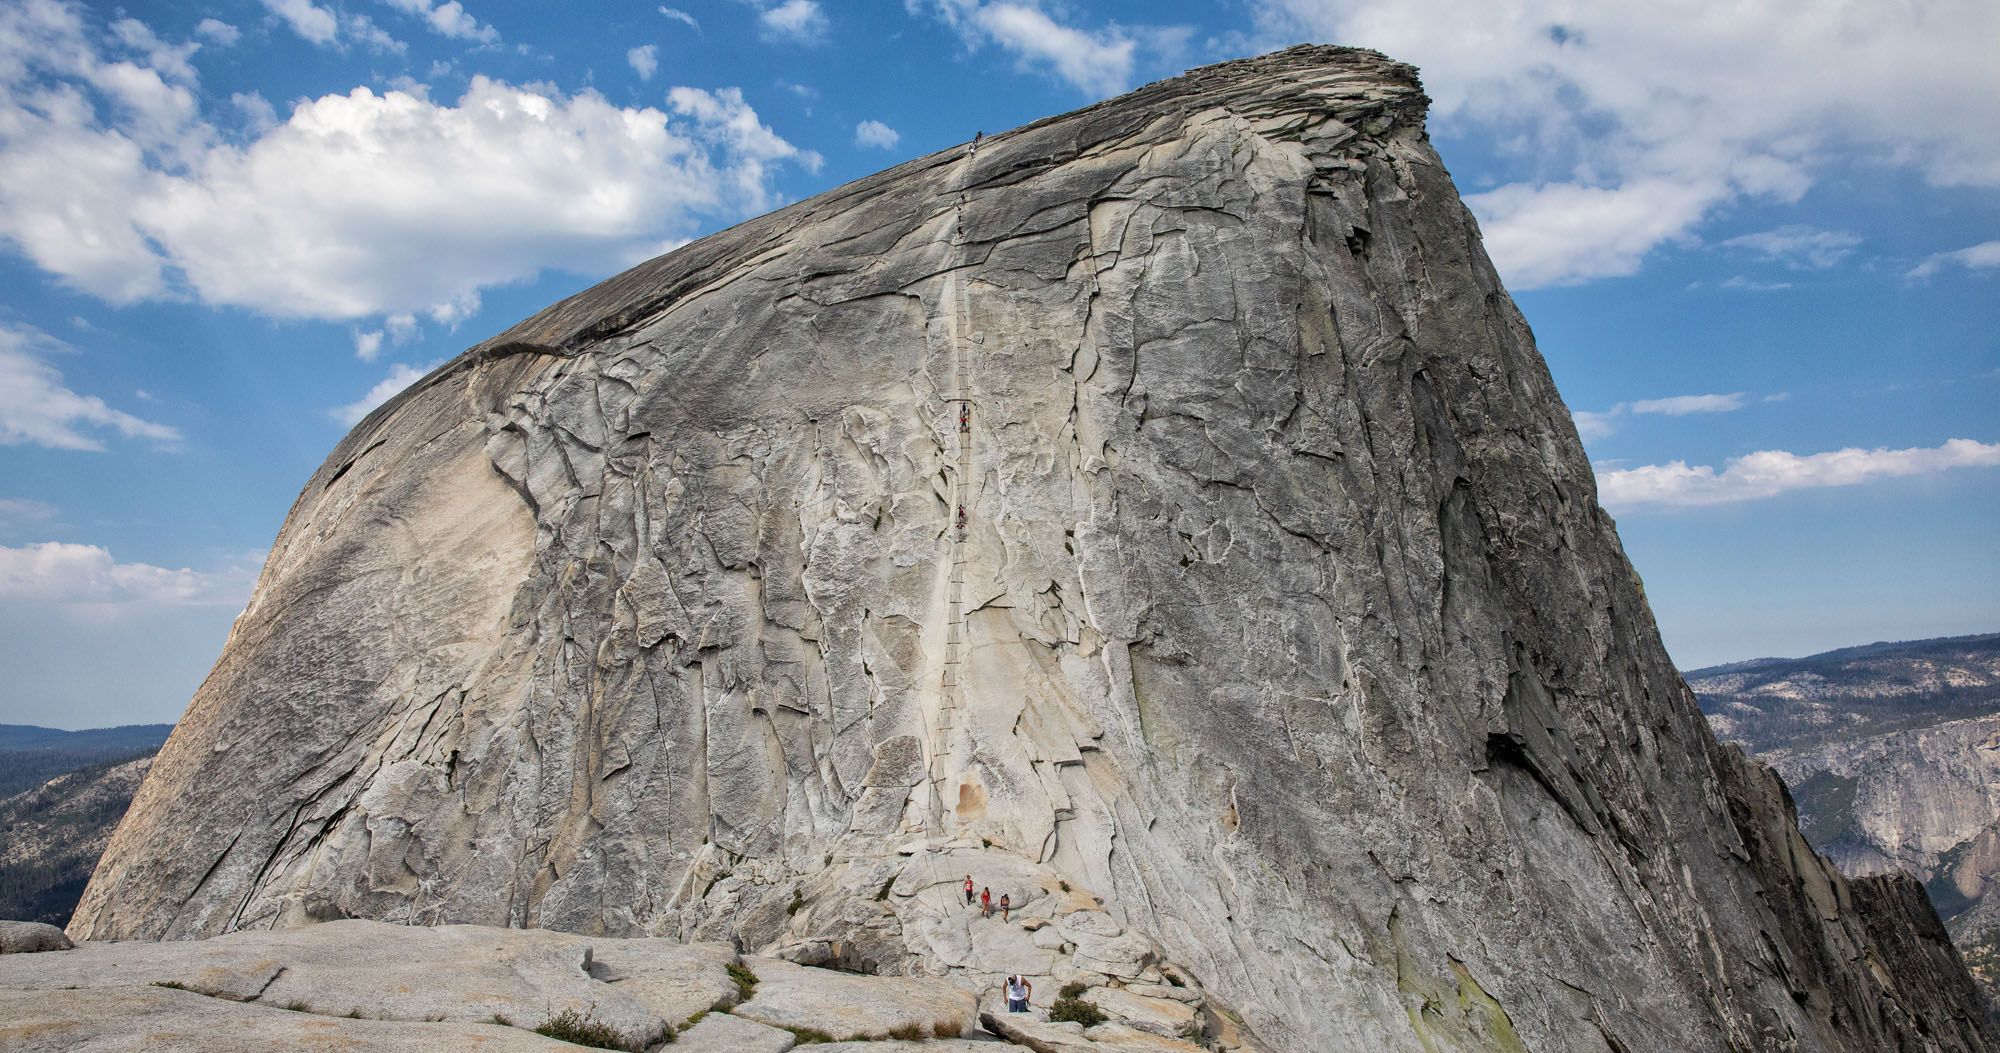 Featured image for “How to Hike Half Dome in Yosemite, A Step-by-Step Guide”